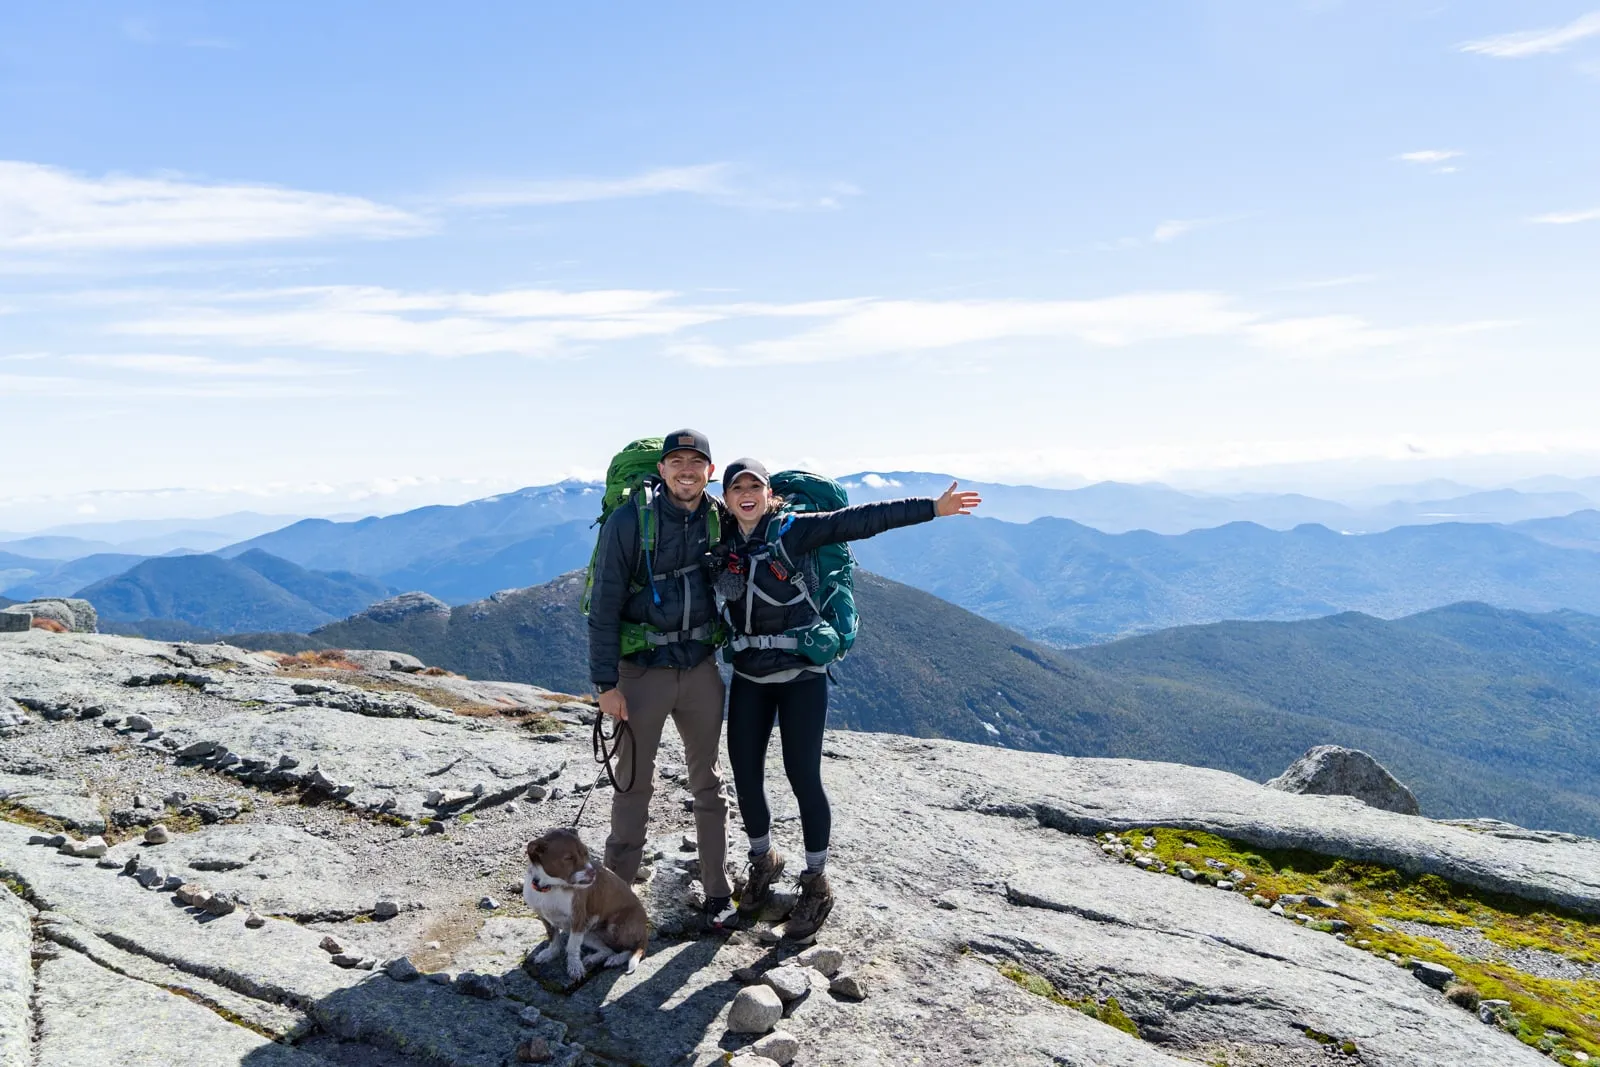 How to hike Mount Marcy, the highest point in New York (Day hike + backpacking routes)